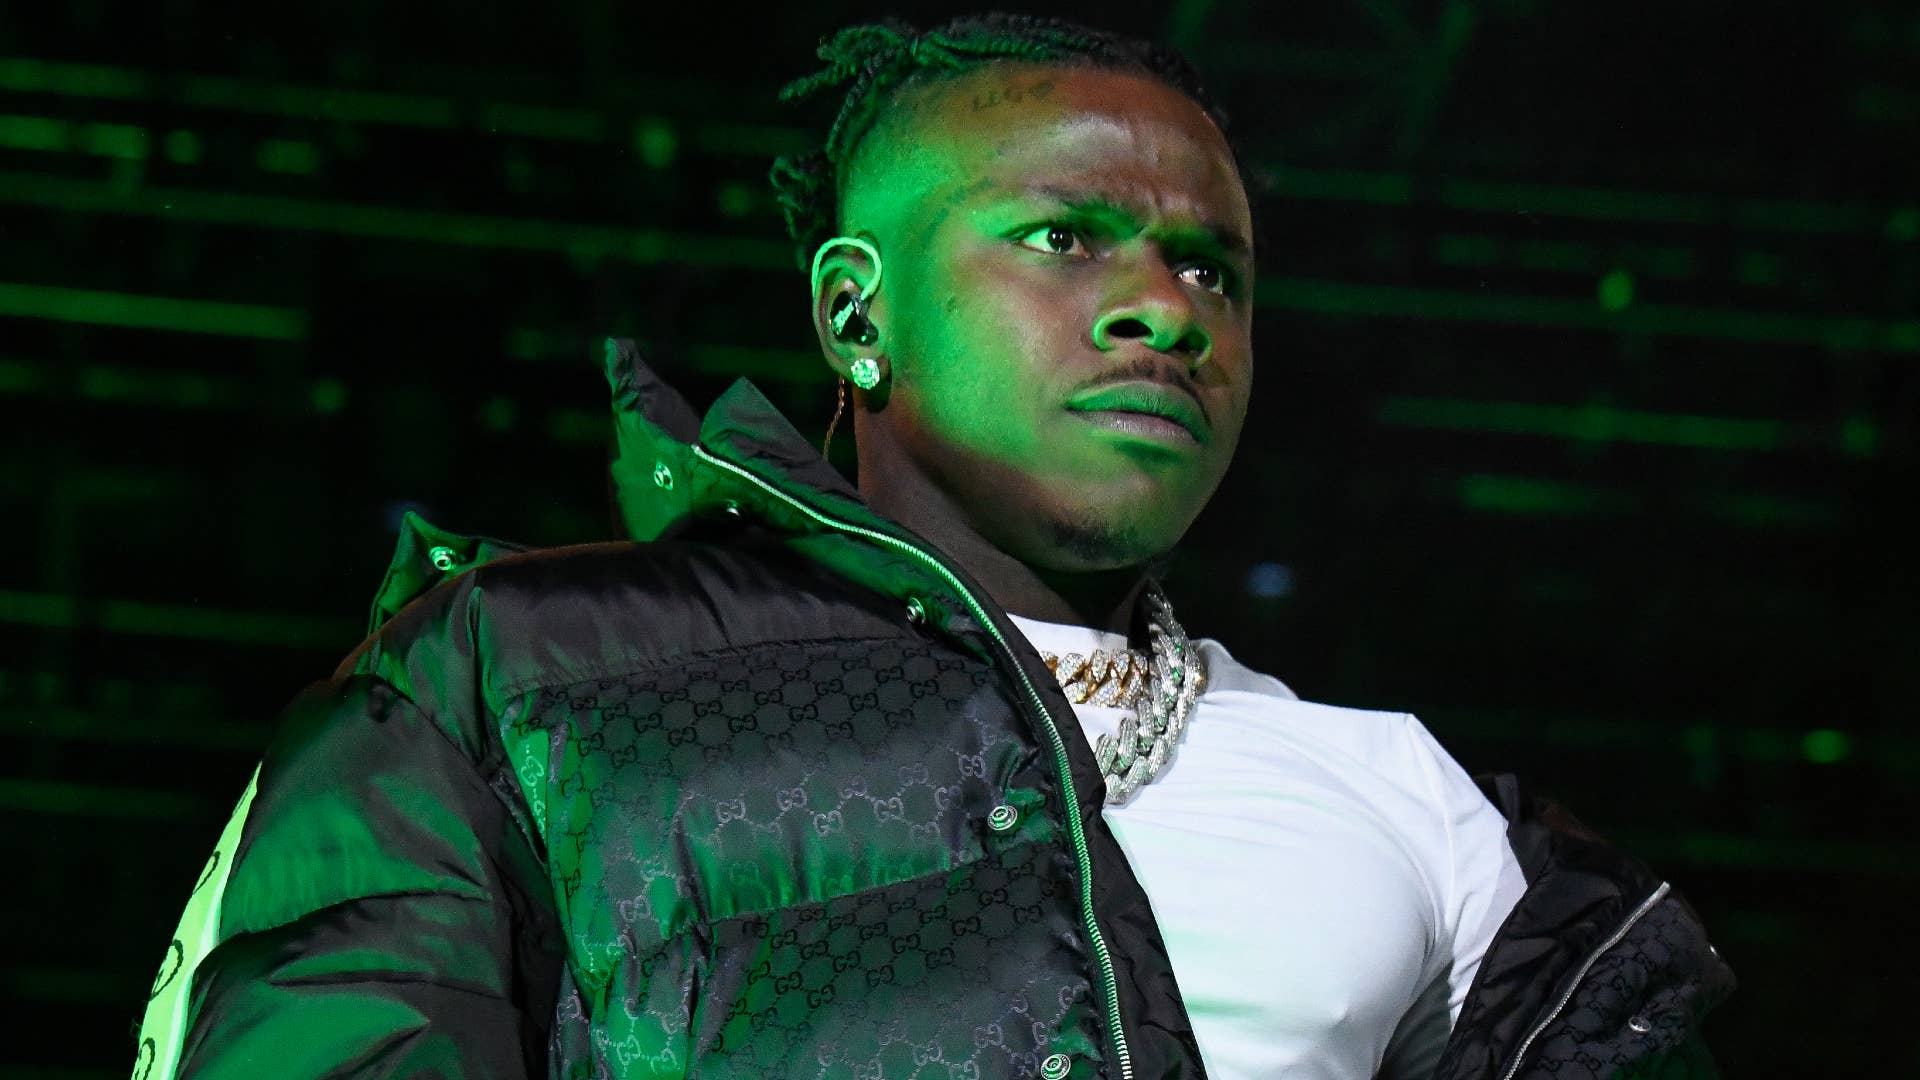 DaBaby appears onstage at a show.